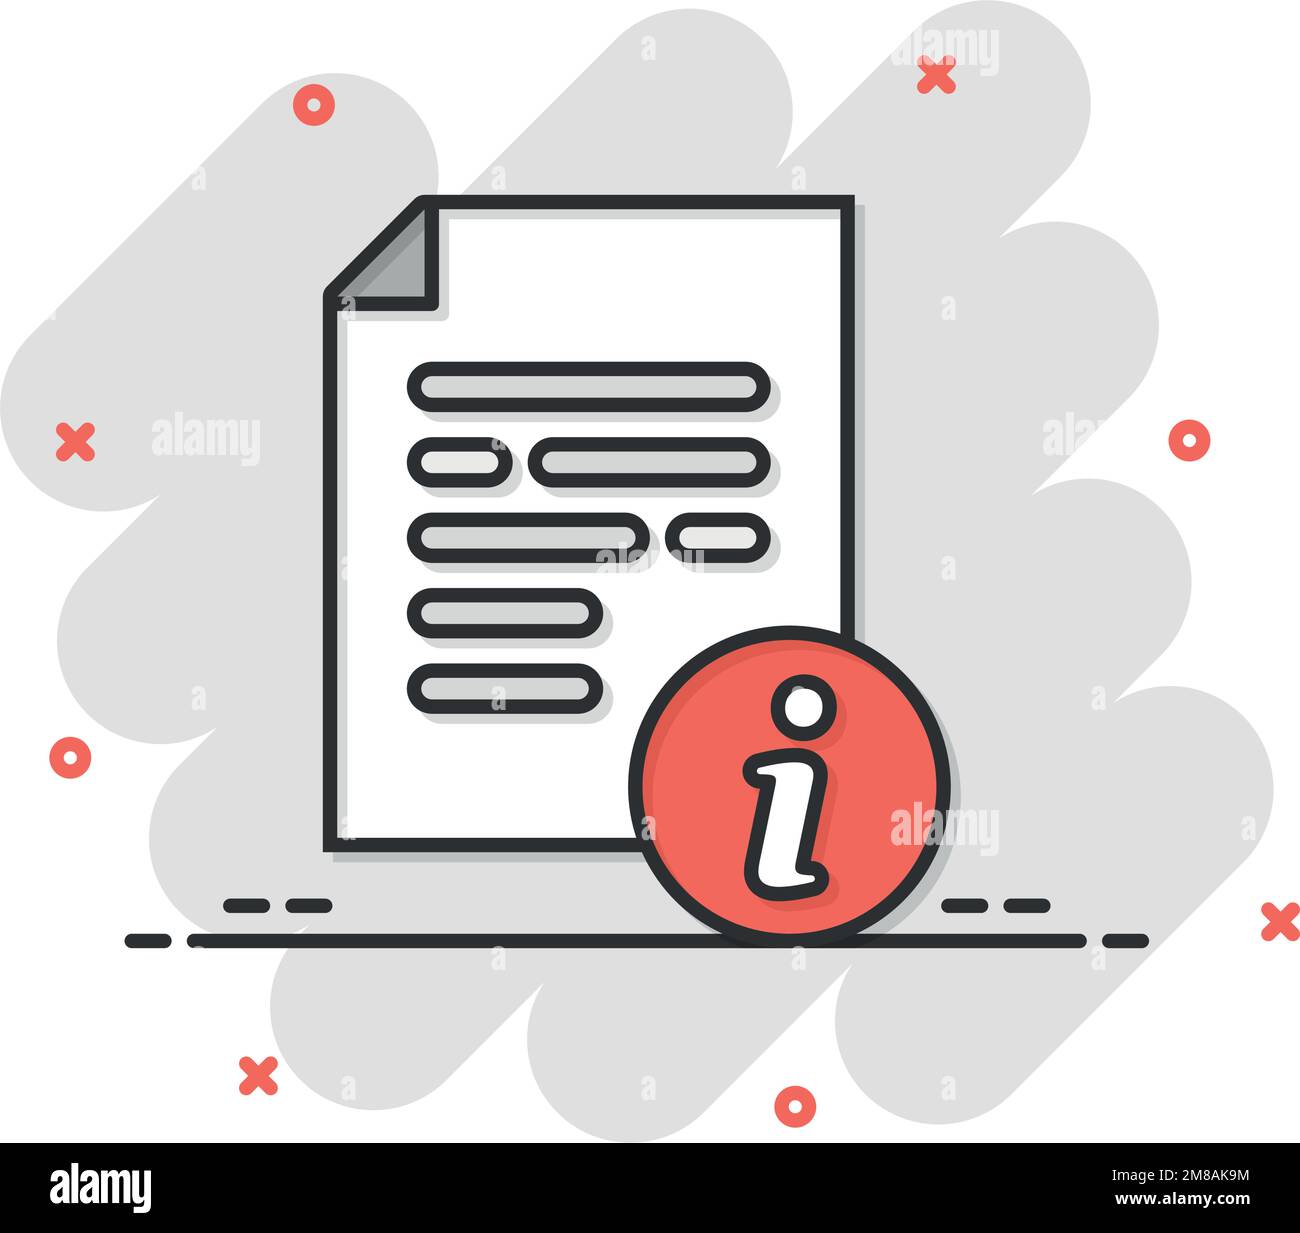 Instruction document icon in comic style. Manual cartoon vector illustration on isolated background. Paper sheet splash effect sign business concept. Stock Vector